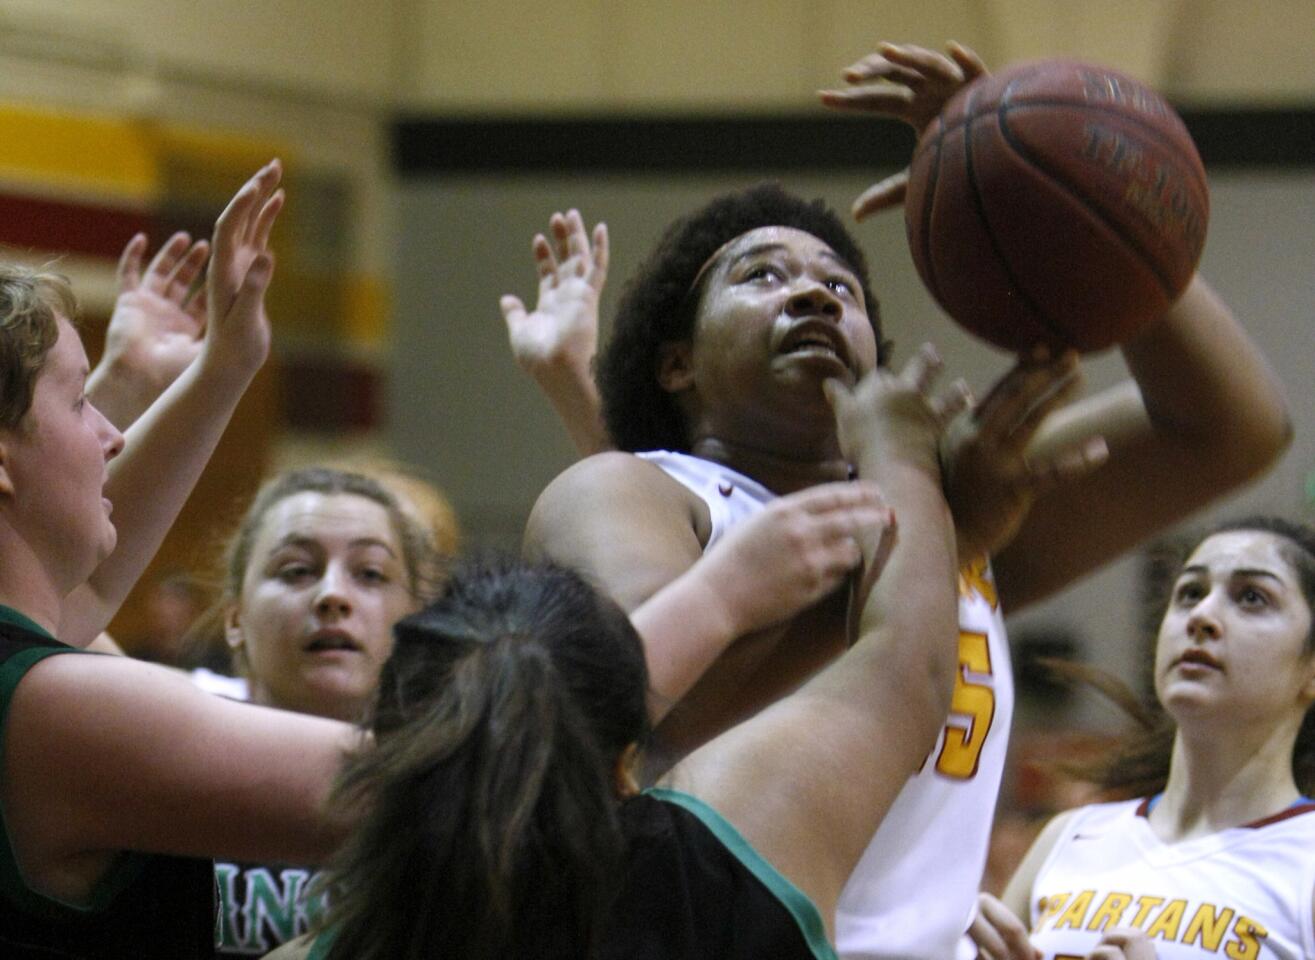 La Cañada High School girls basketball player #45 Zoe Williams get hammered as she goes up for a basket in the paint in championship game vs. Thousand Oaks High School in the La Cañada High School New Year's Eve tournament at home in La Cañada Flintridge on Thursday, Dec. 29, 2016.